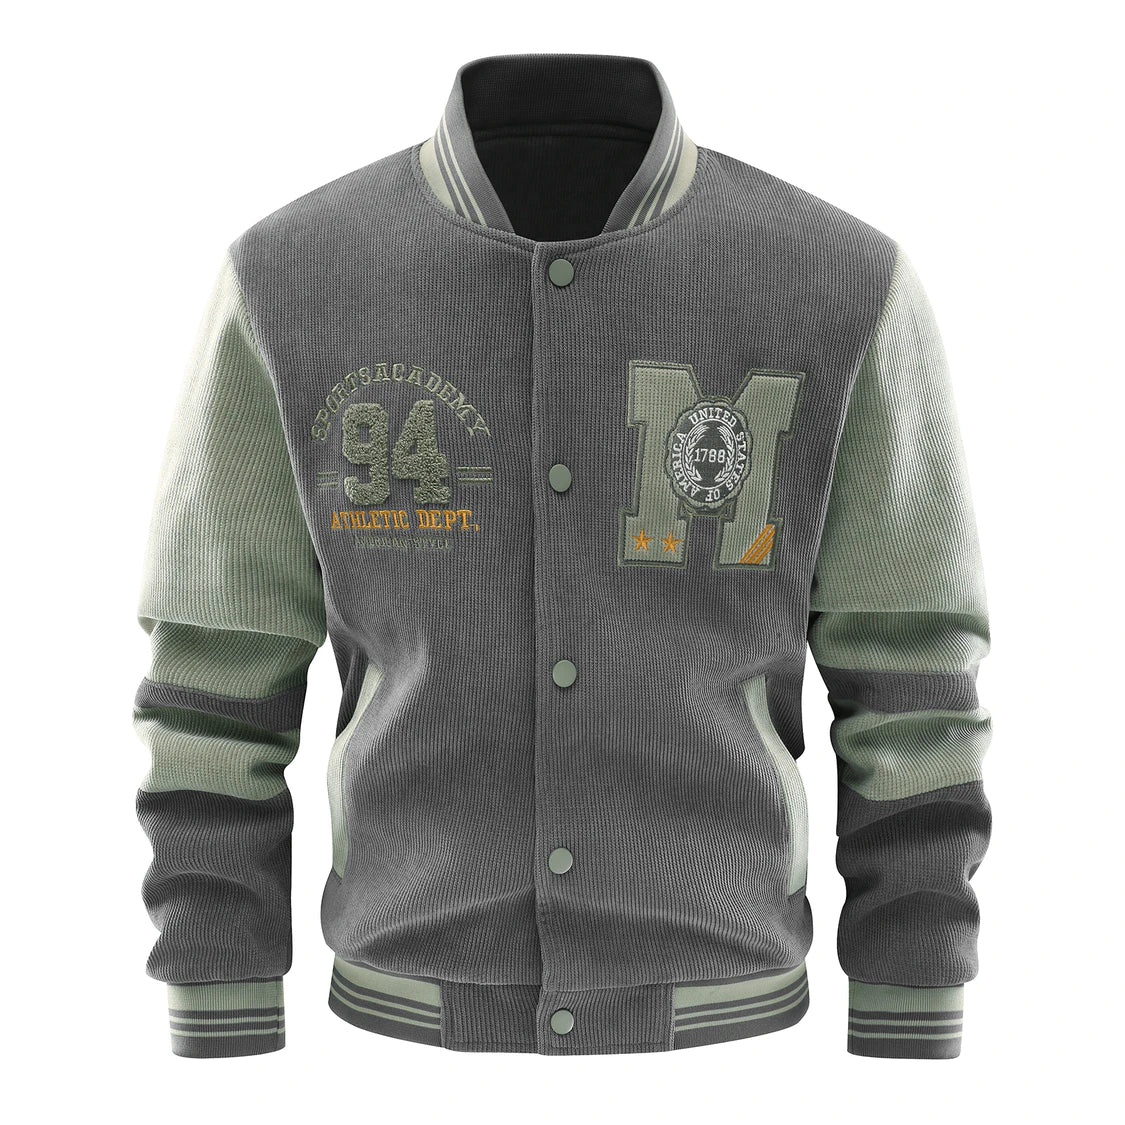 Men's High Quality Cotton Knitted Corduroy Baseball Jacket